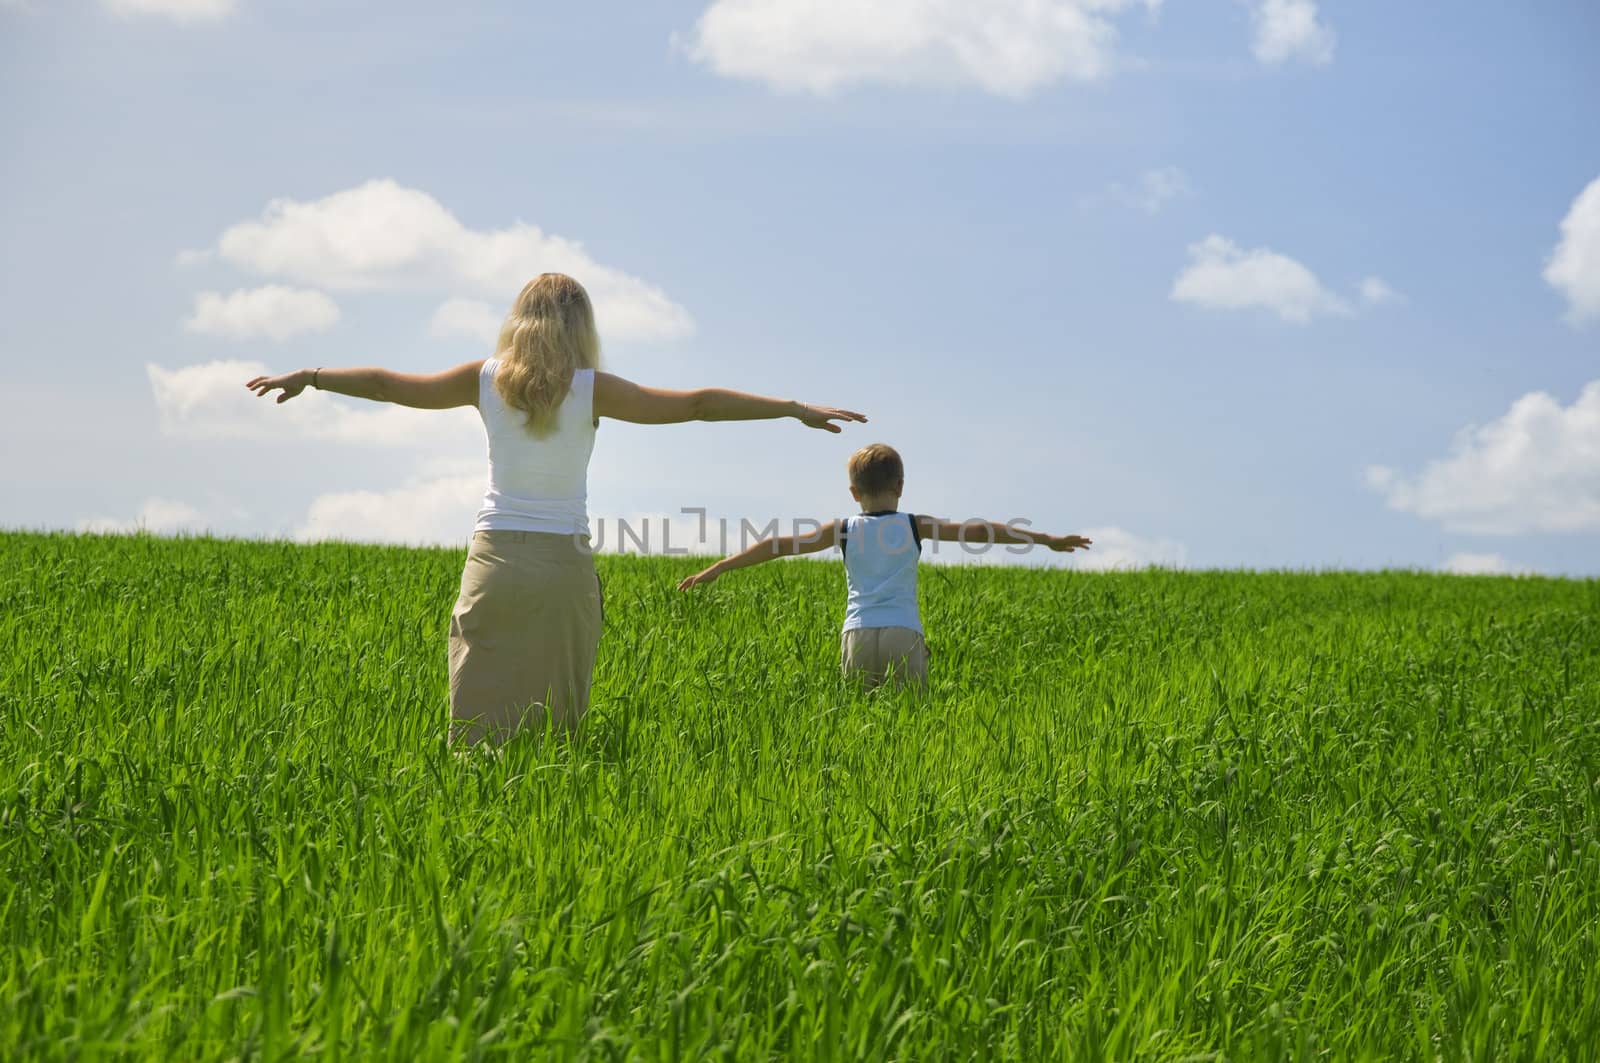 ma and son walk in field. agricultural nature landscape with blu by jordano